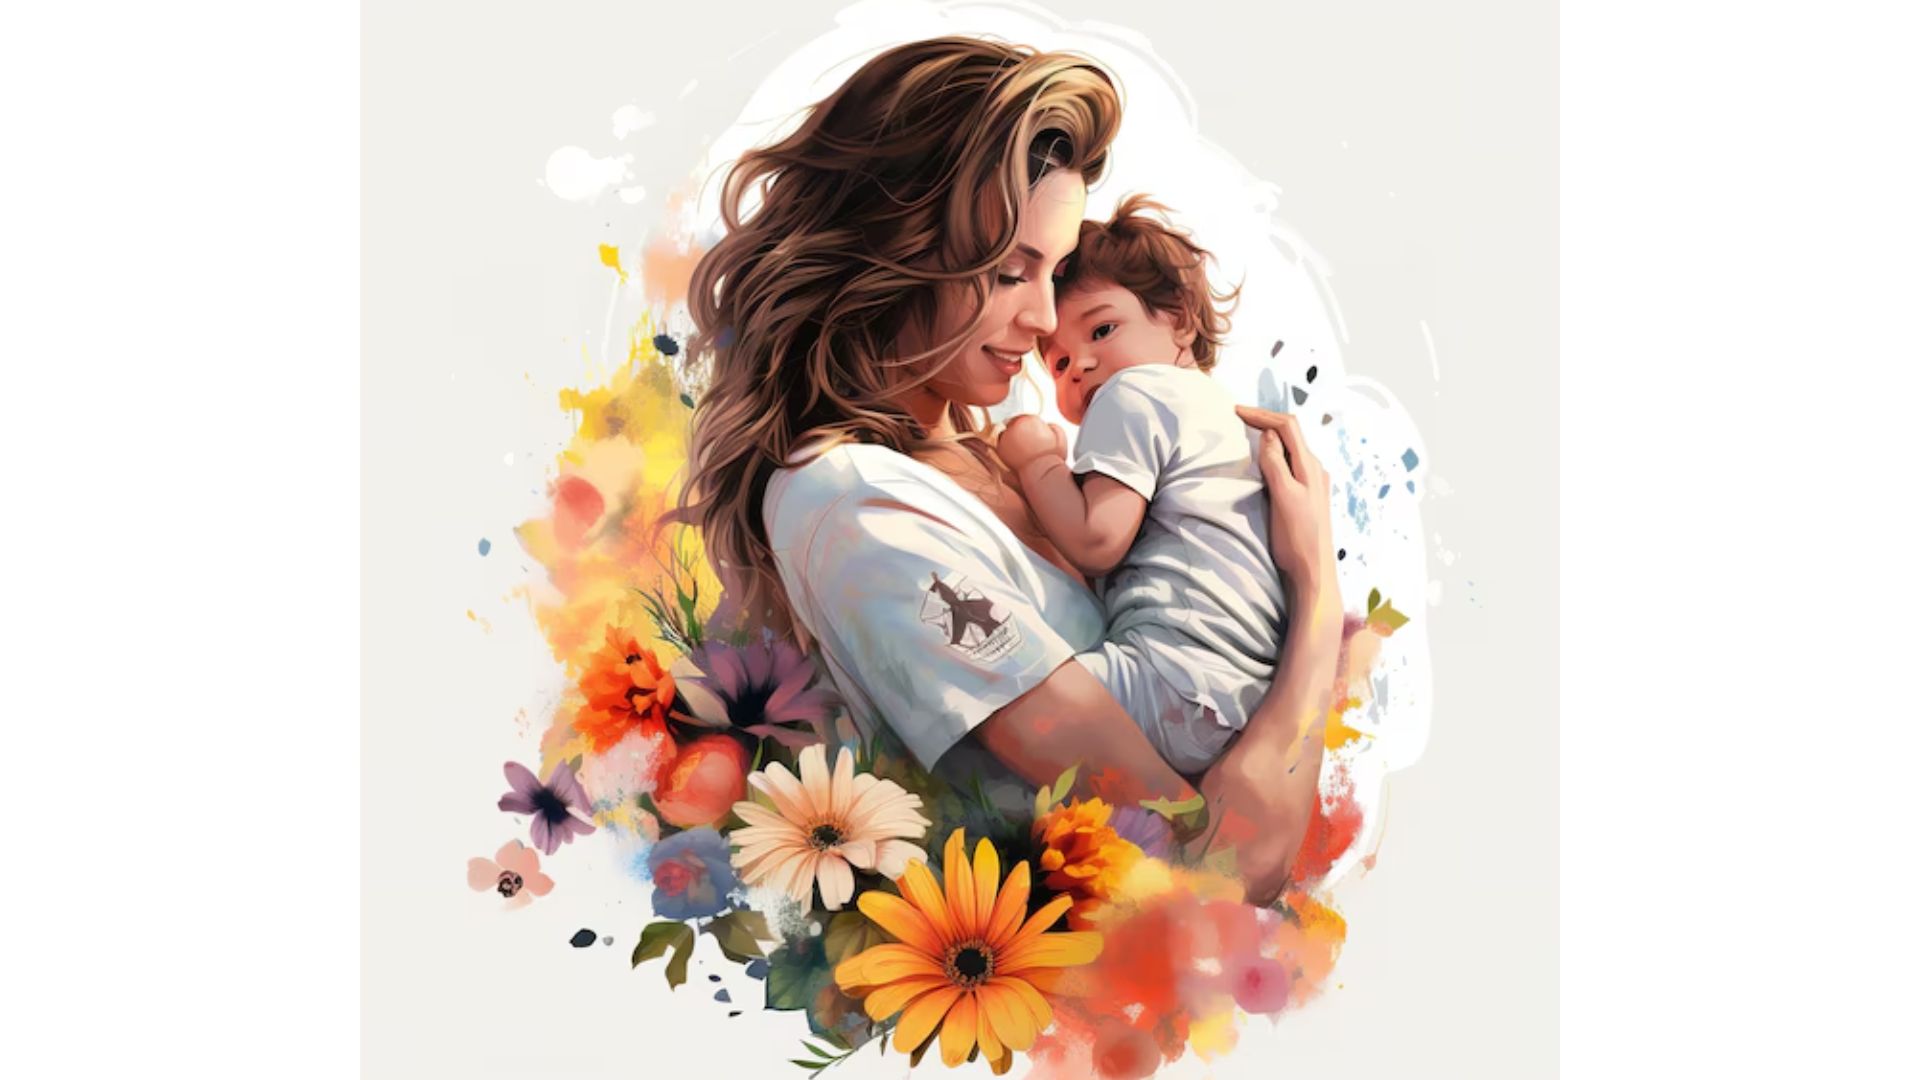 POEM: Whispers of a Mother’s Love